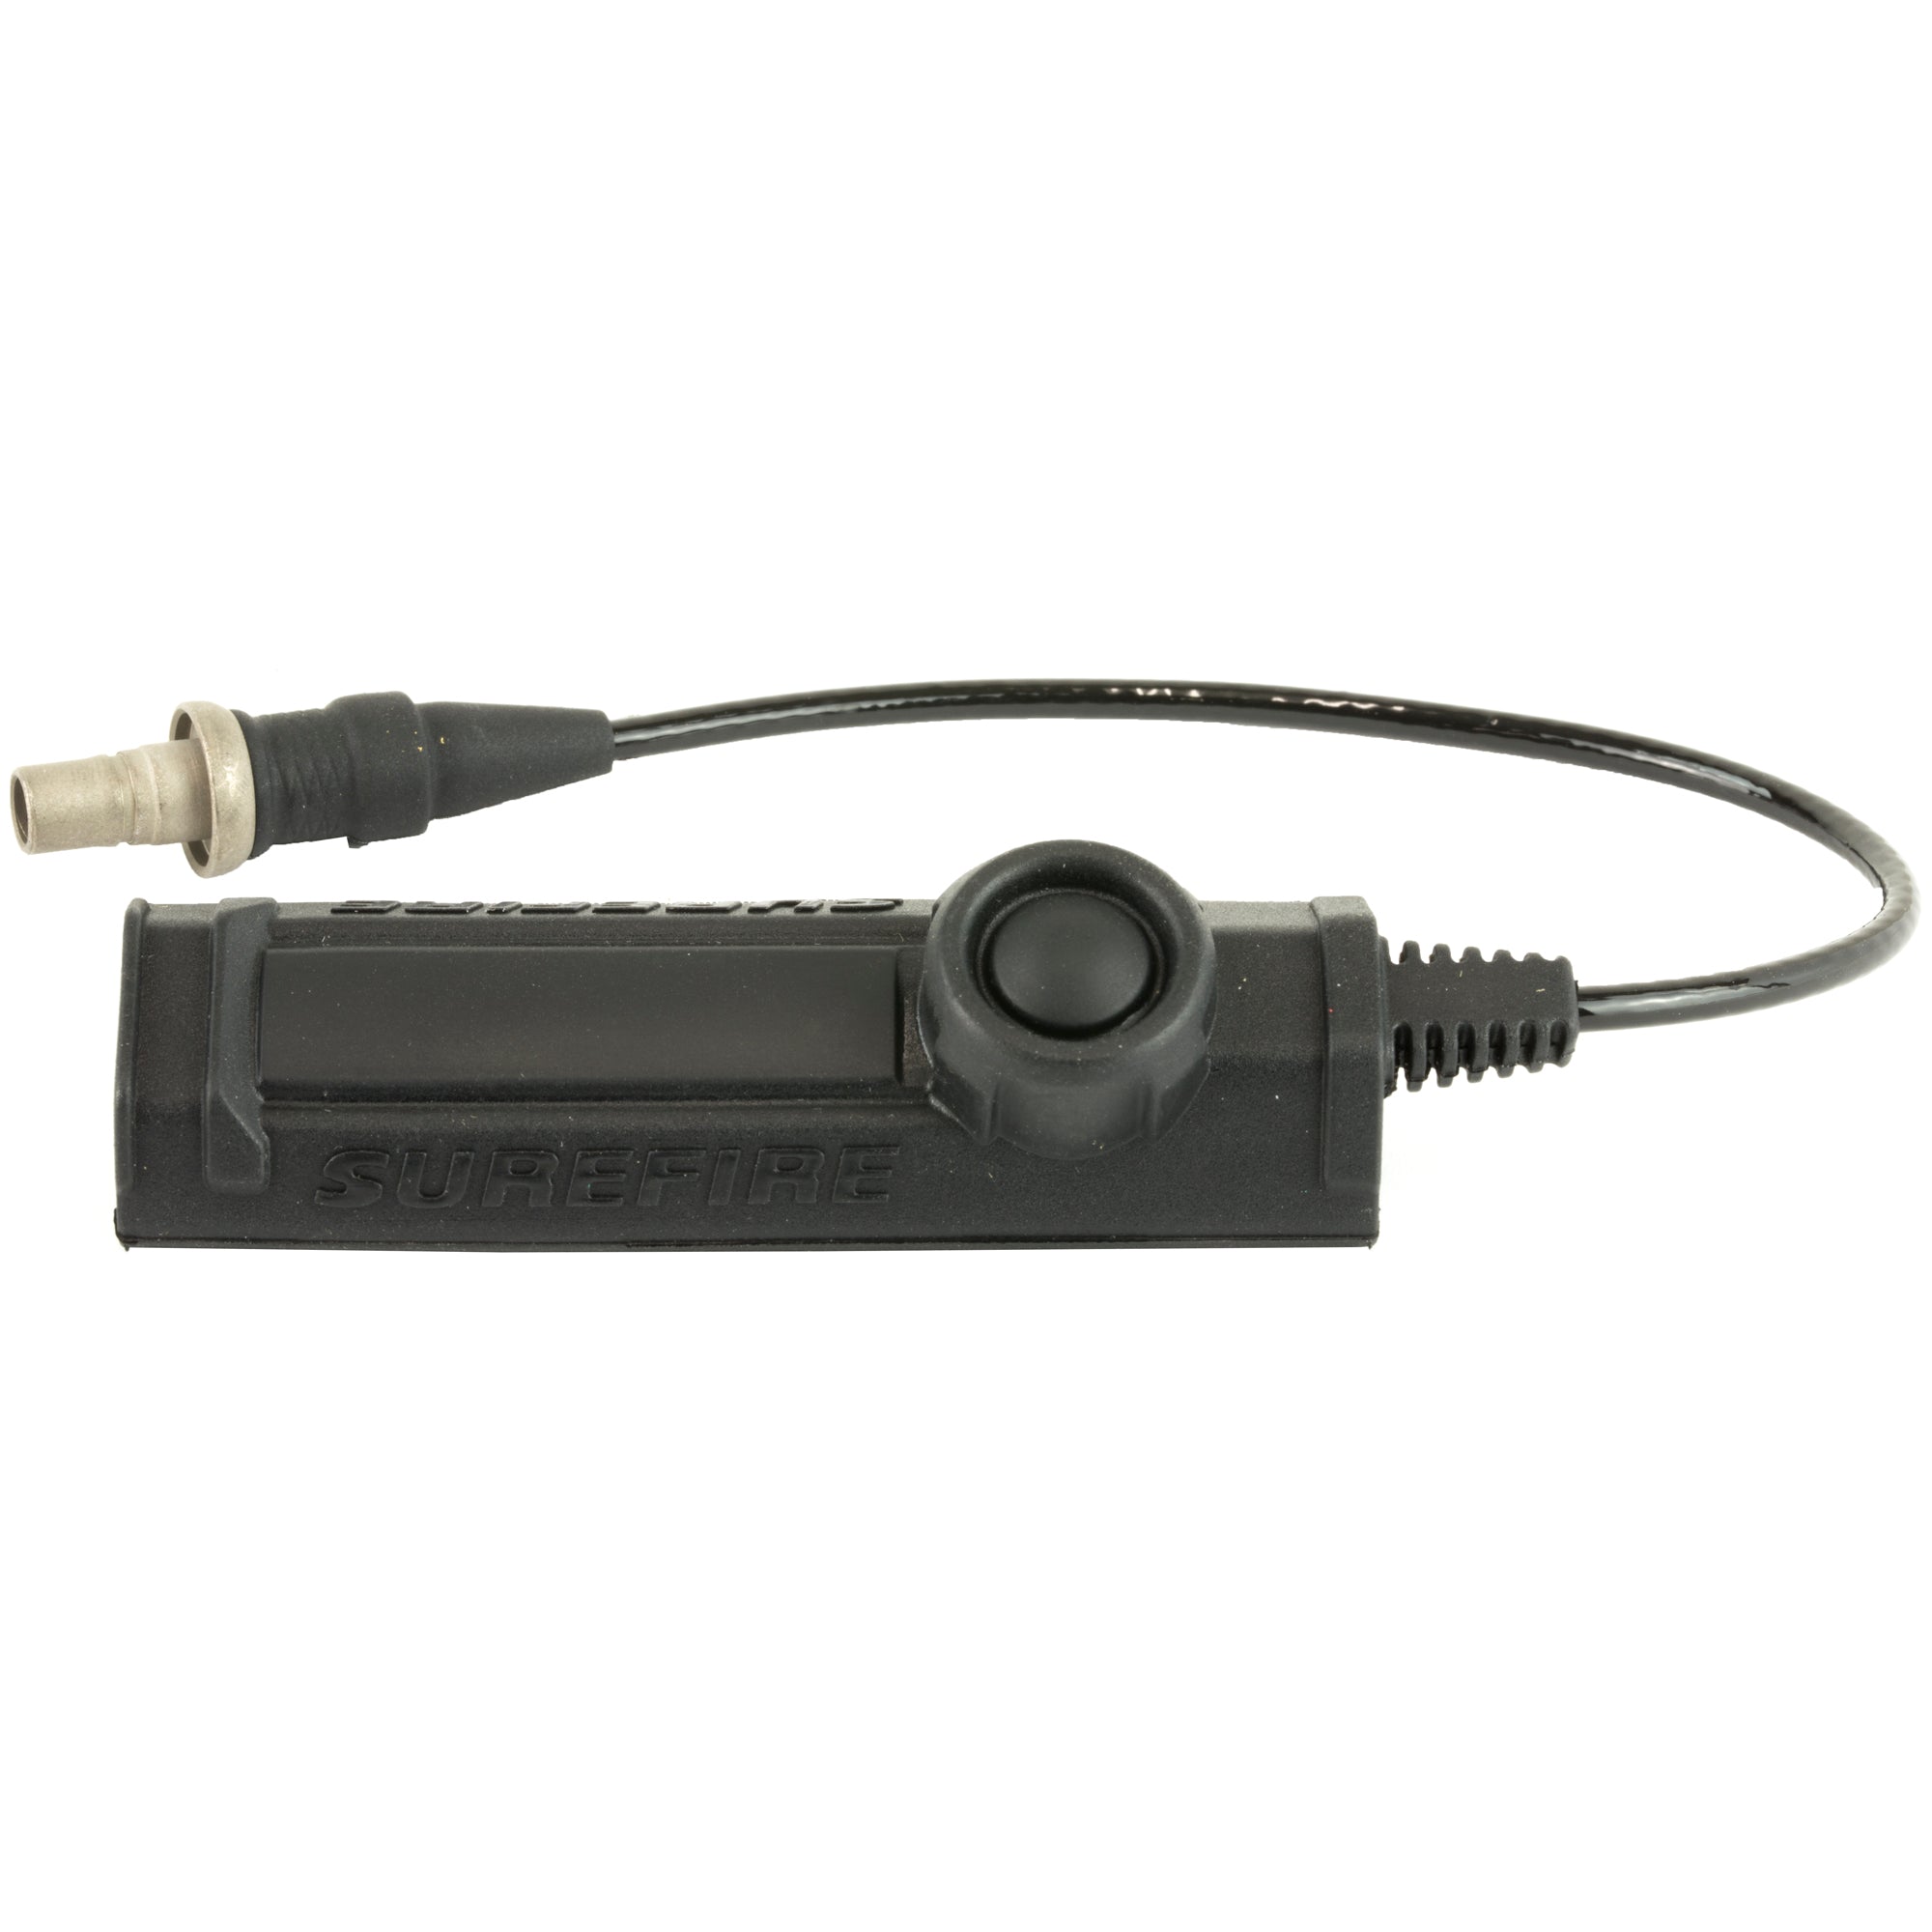 Surefire Remote Dual Switch in black, with a 7-inch cable, compatible with multiple Surefire weapon light models, featuring momentary-on pressure pad and constant-on press switch.